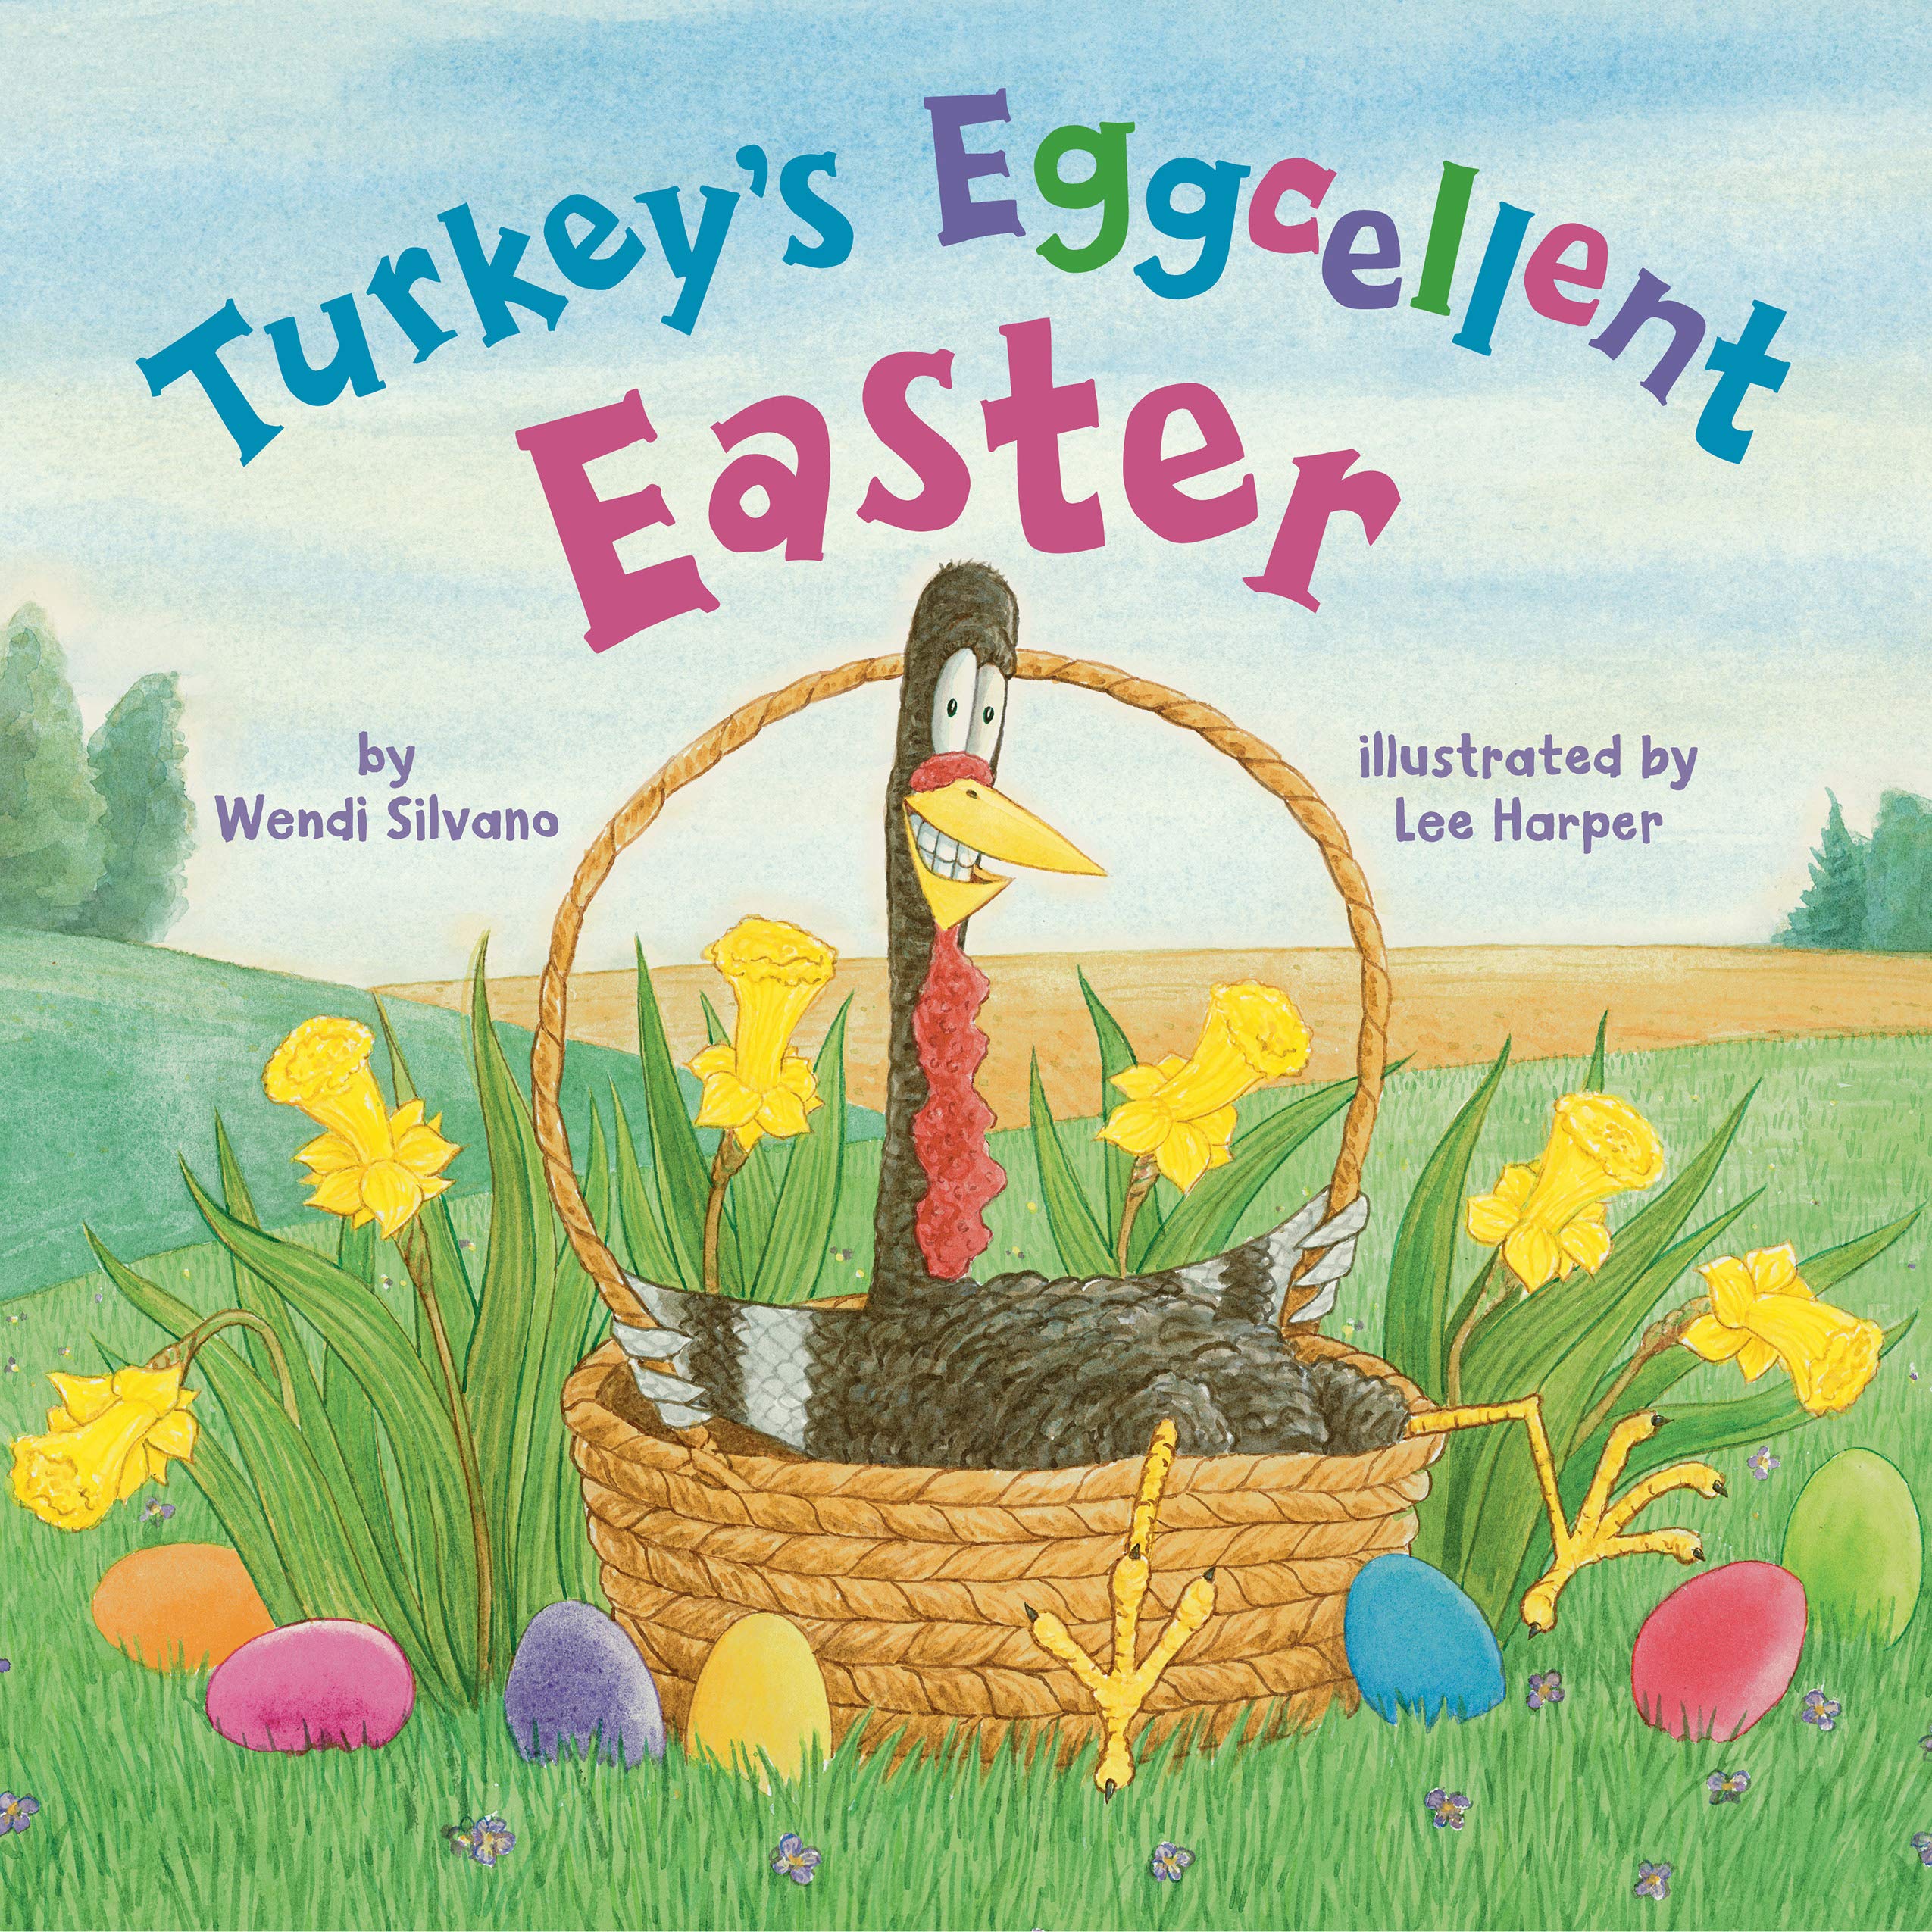 Turkey's Eggcellent Easter by Wendi Silvano. A fun Easter picture book for toddlers and preschoolers